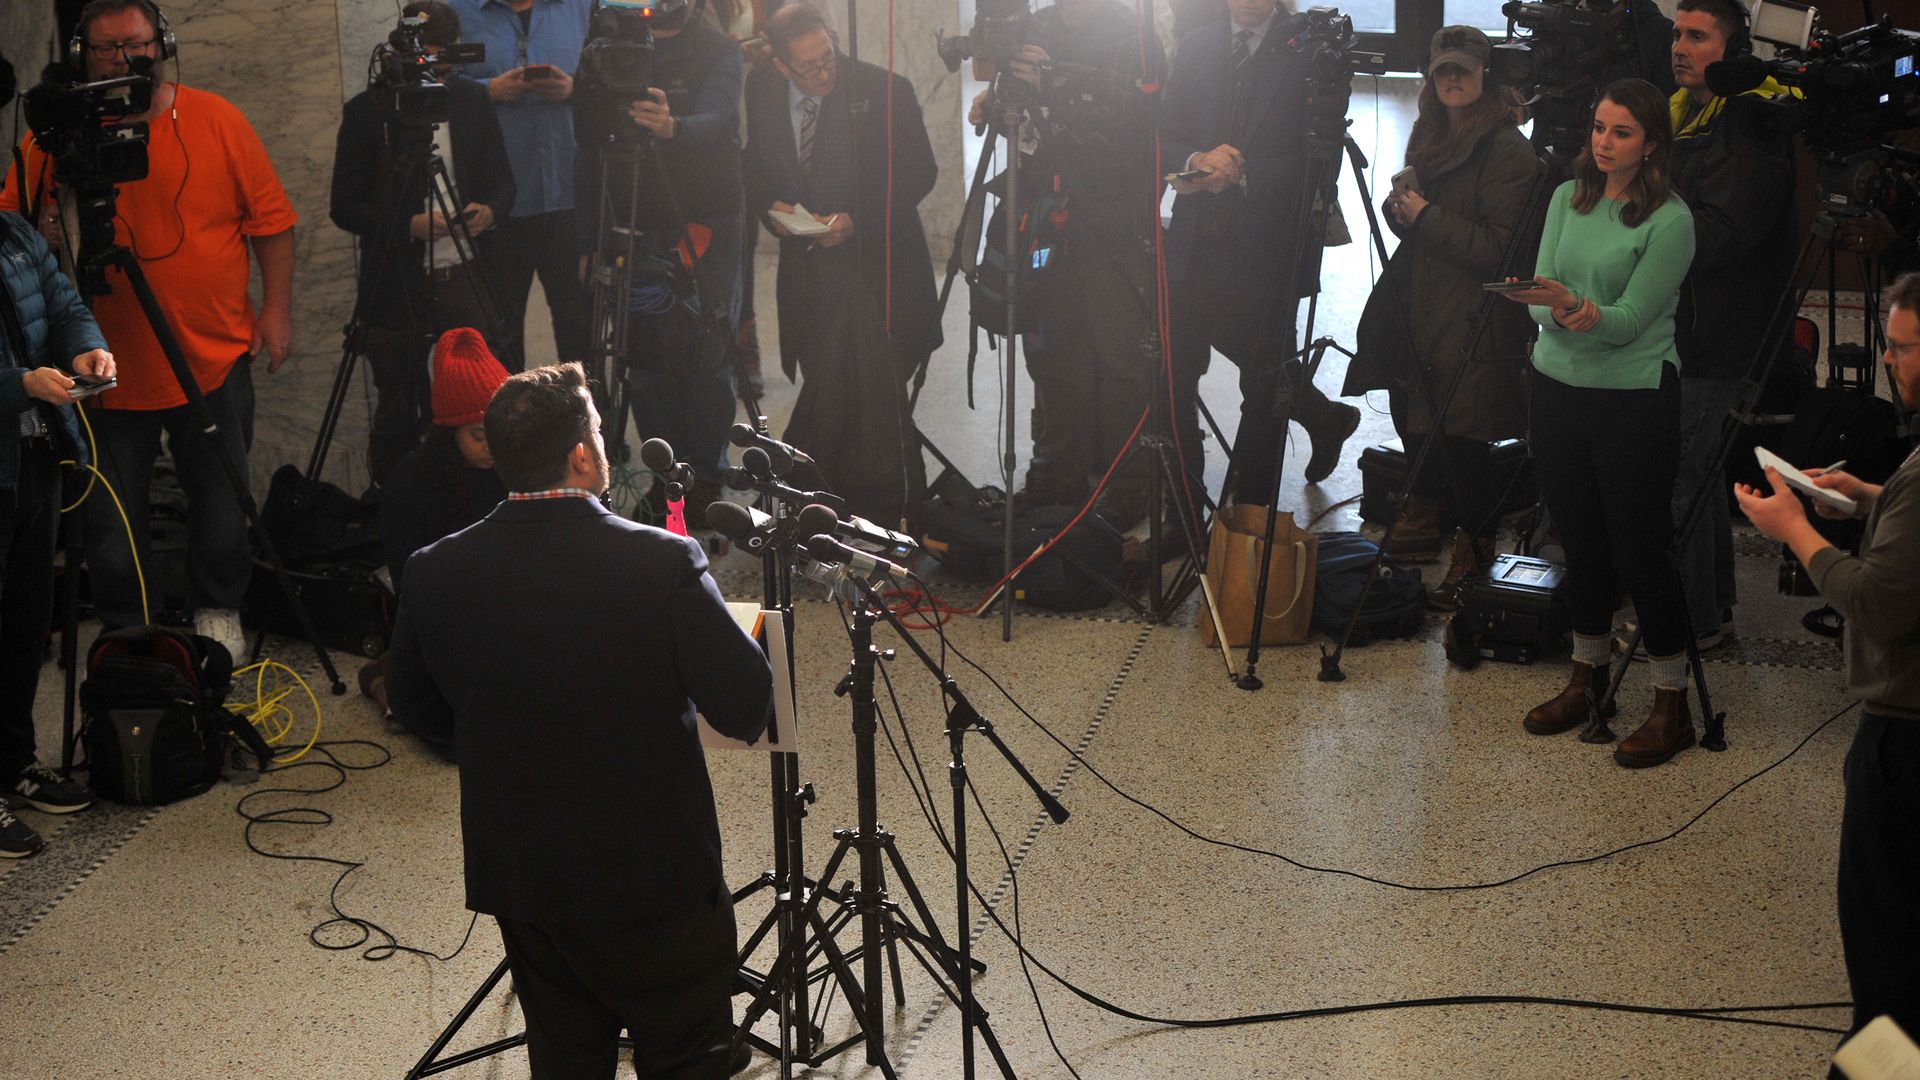 In this image, Troy Price stands in front of a crowd of reporters